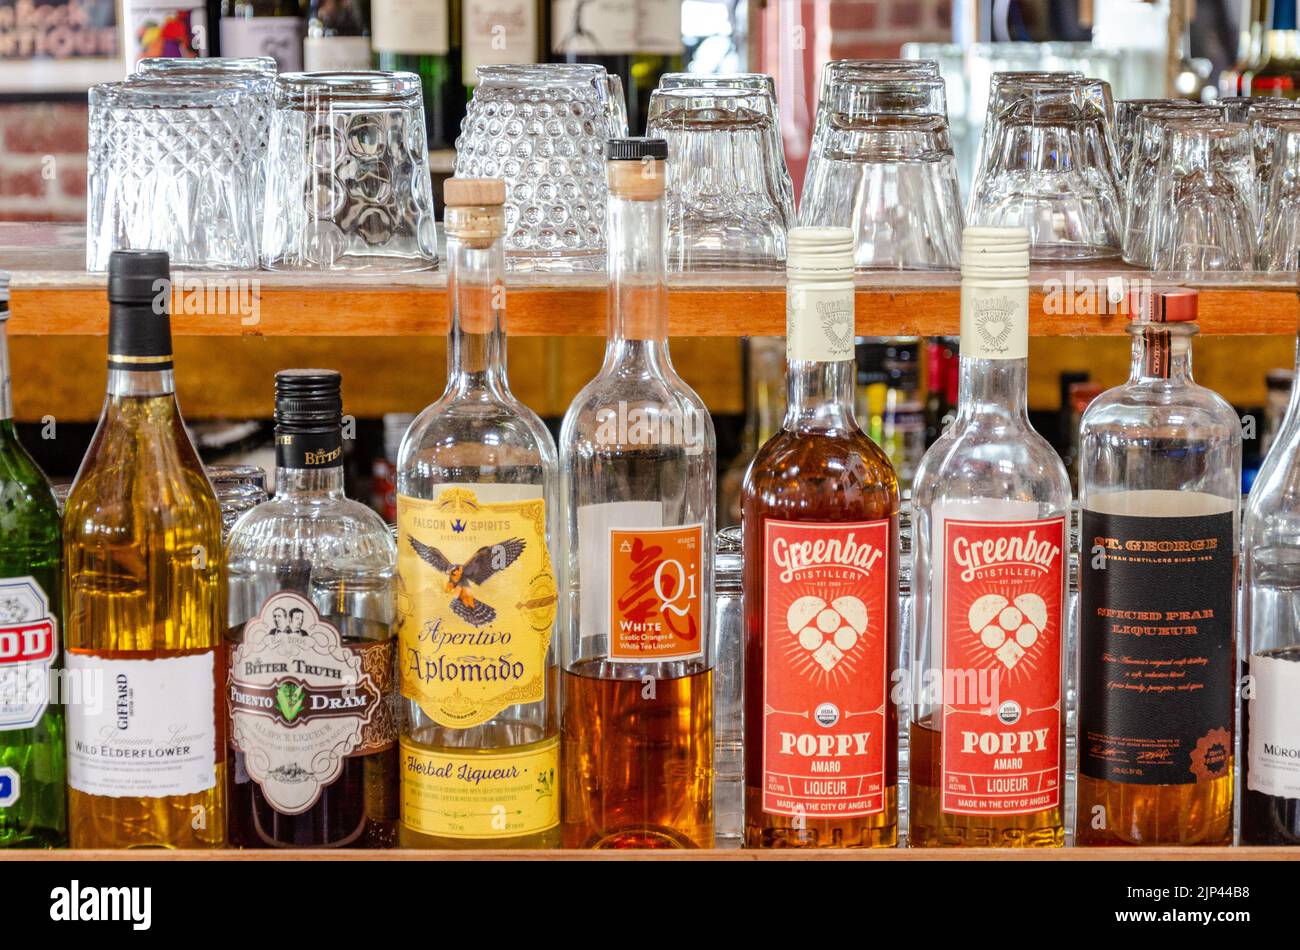 Bottles of liquor and alcoholic drinks at a bar in California, USA Stock Photo